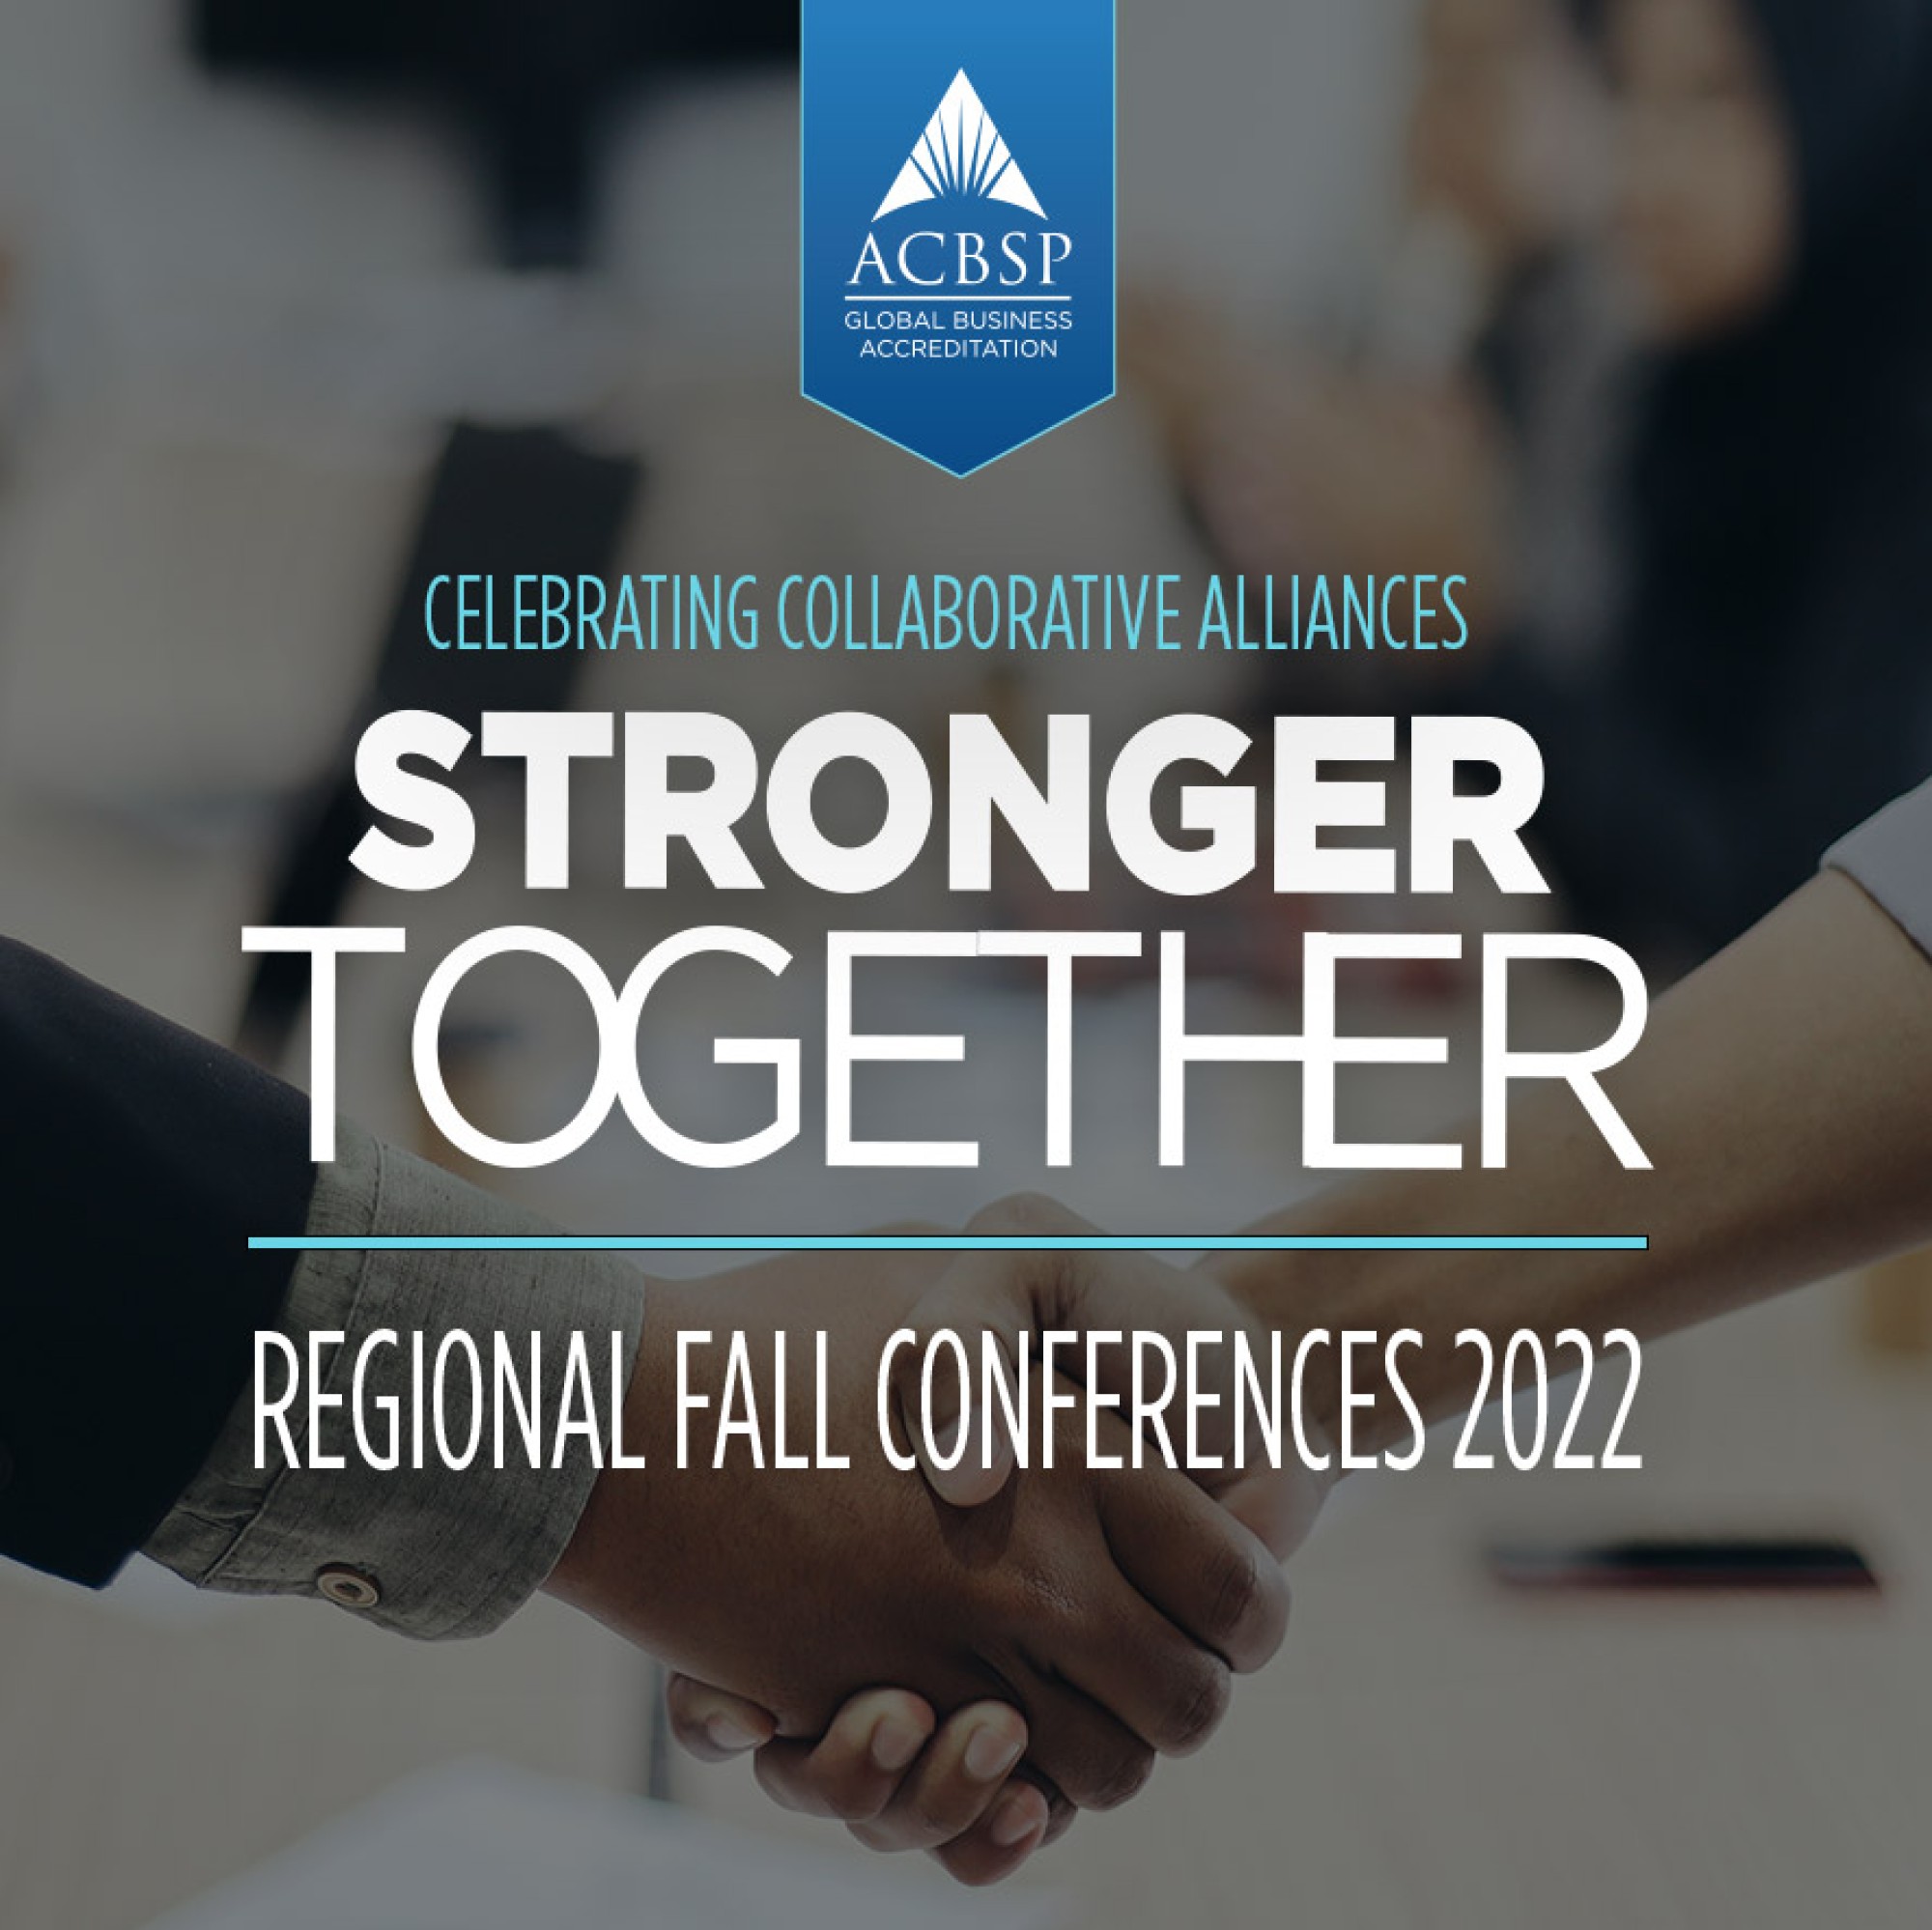 Regional Accreditation Council for Business Schools and Programs Conference